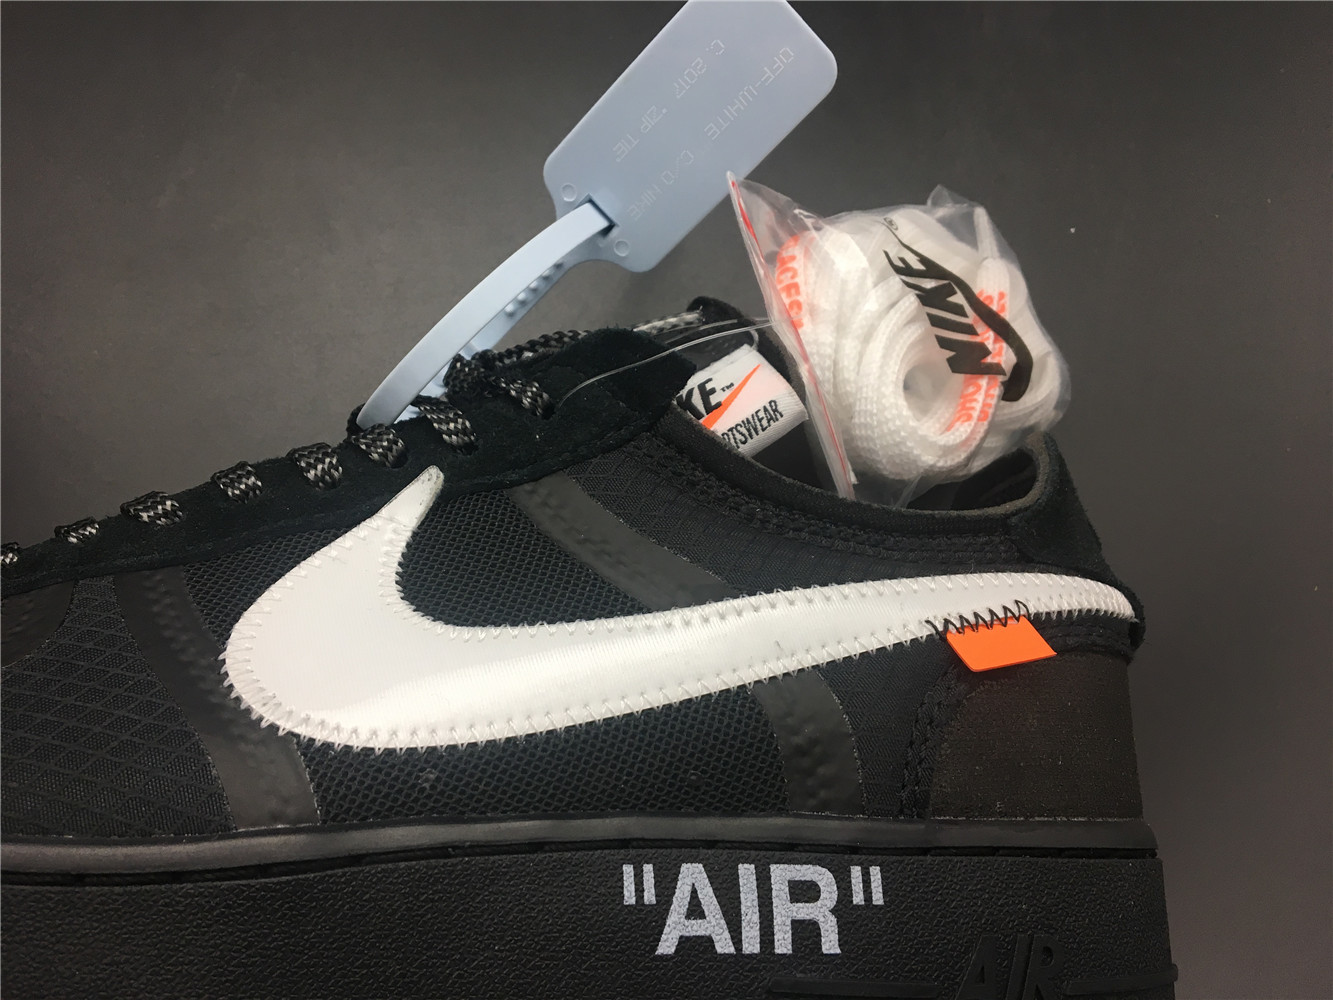 Off-White x Nike Air Force 1 Low Black 